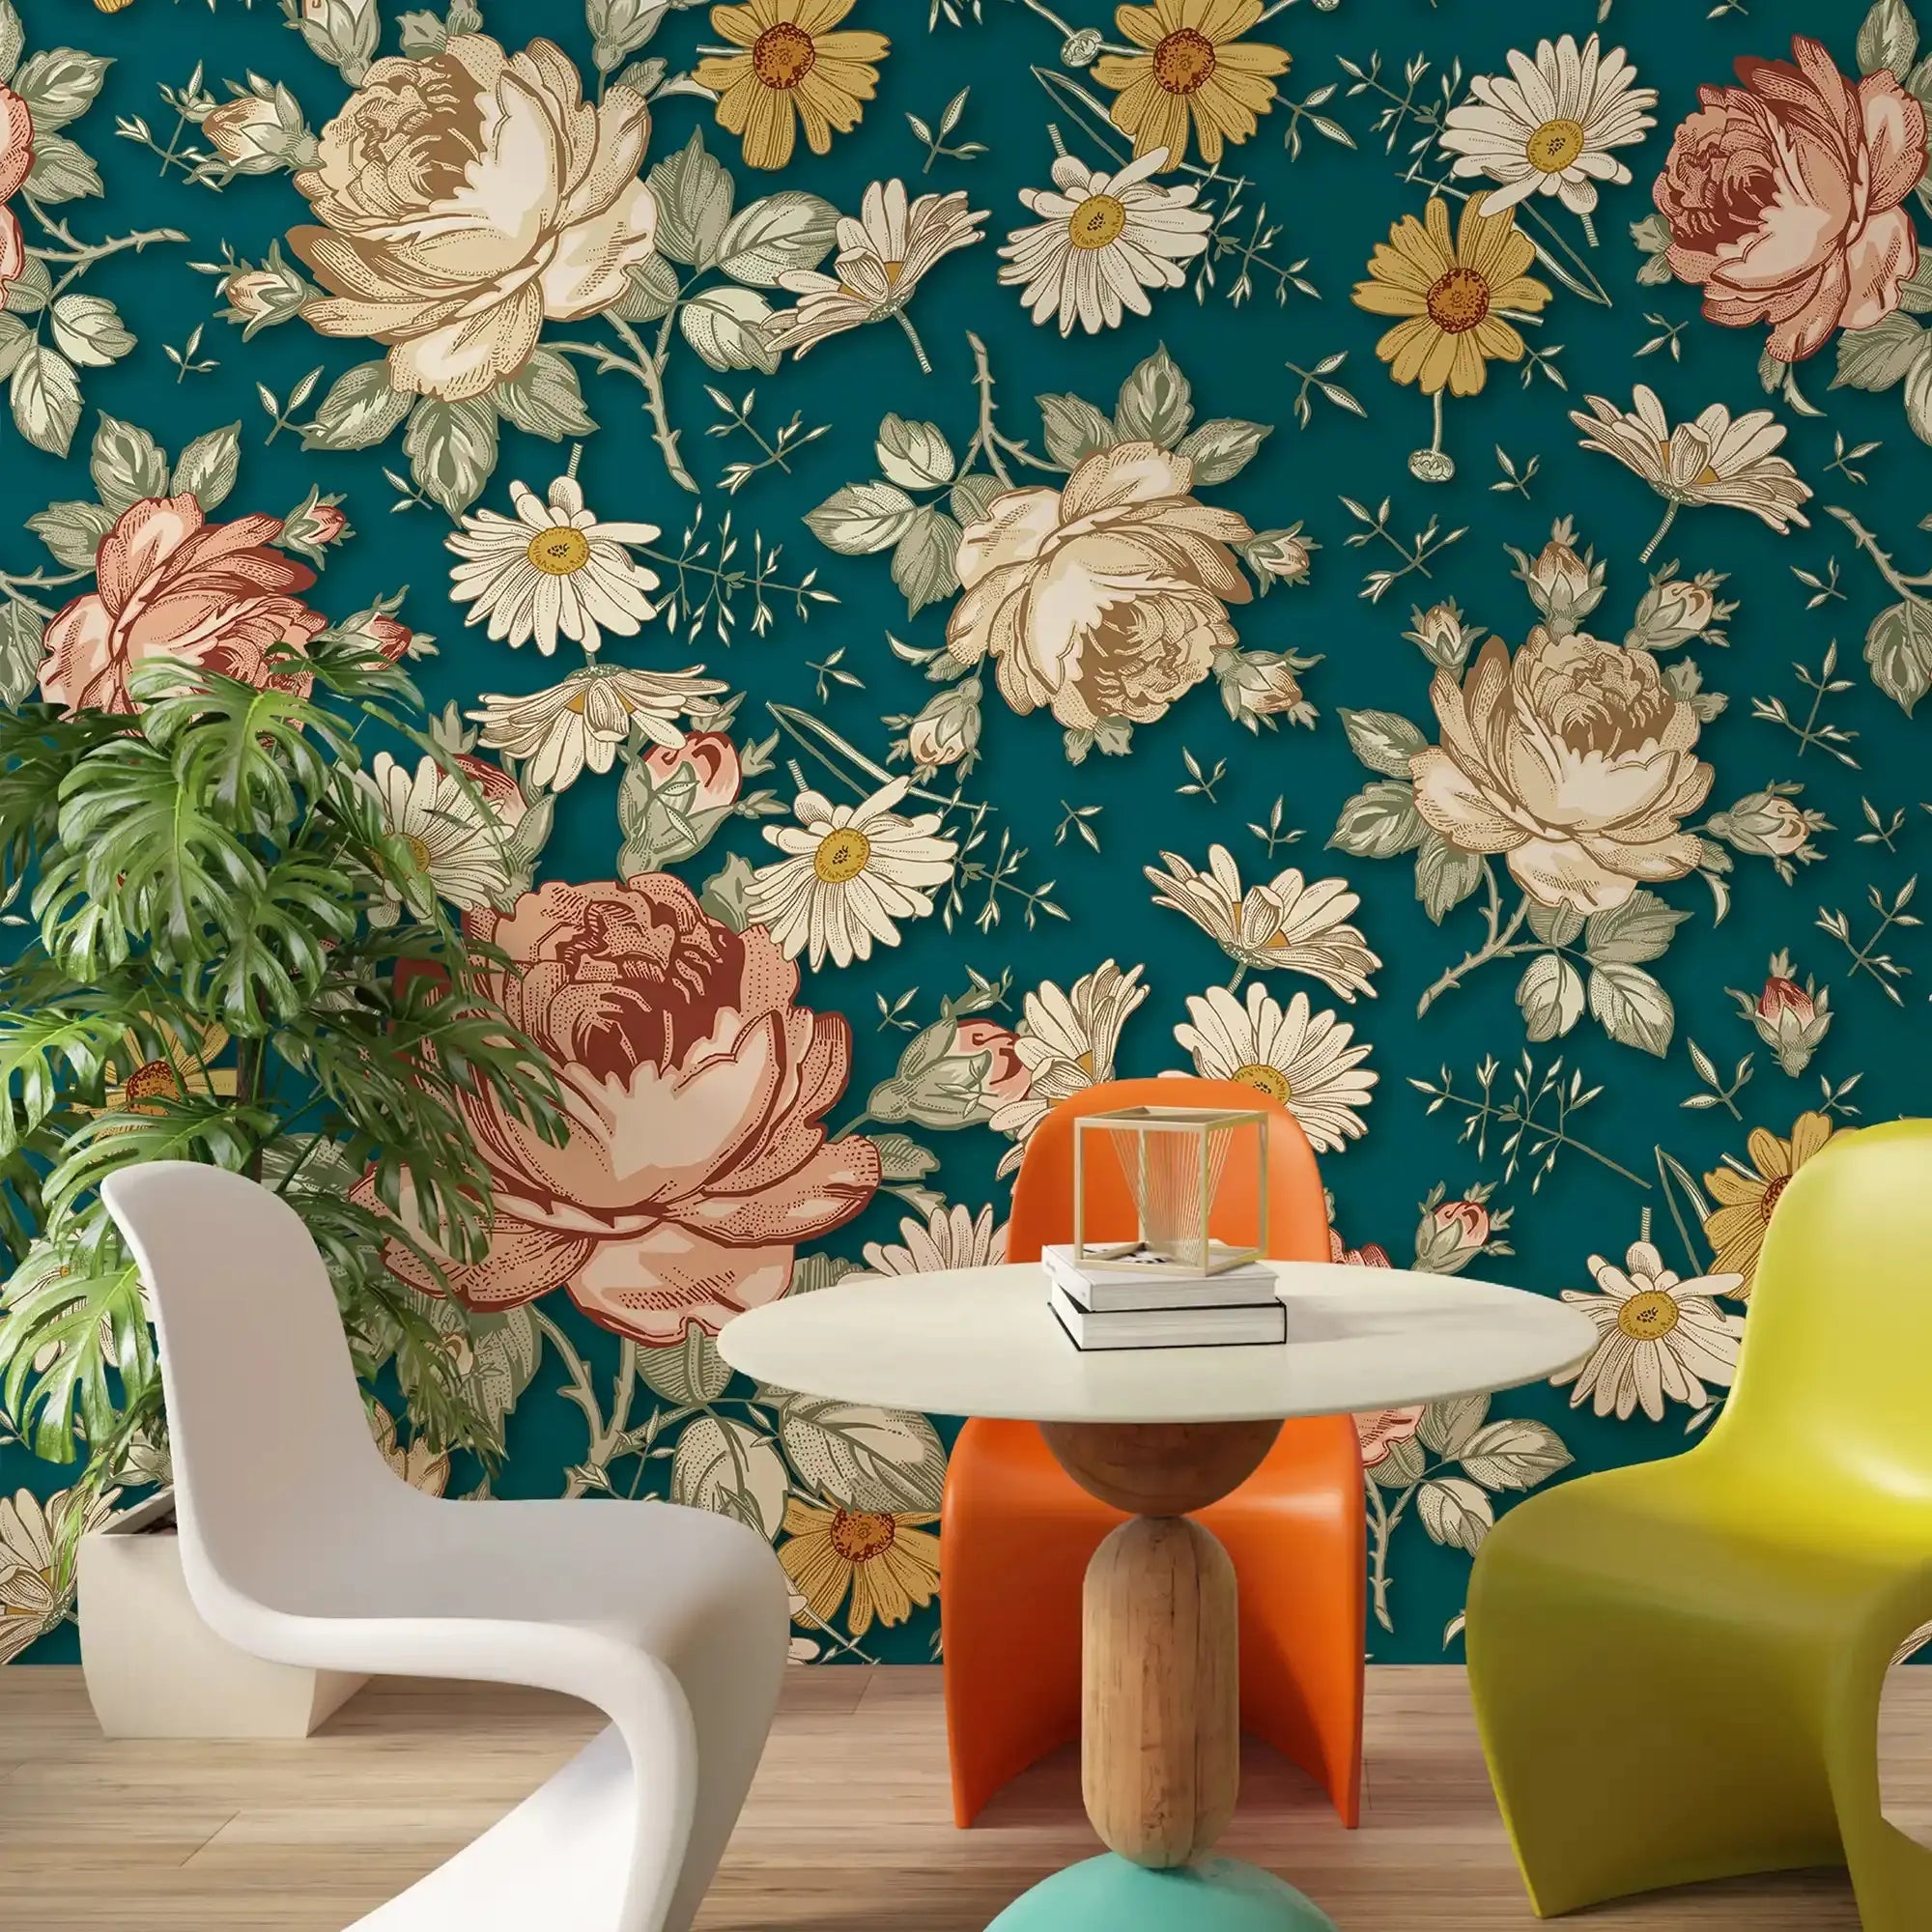 3097-F / Removable Wallpaper Peel and Stick, Floral & Geometric Pattern Wallpaper with Daisies for Room Decor - Artevella